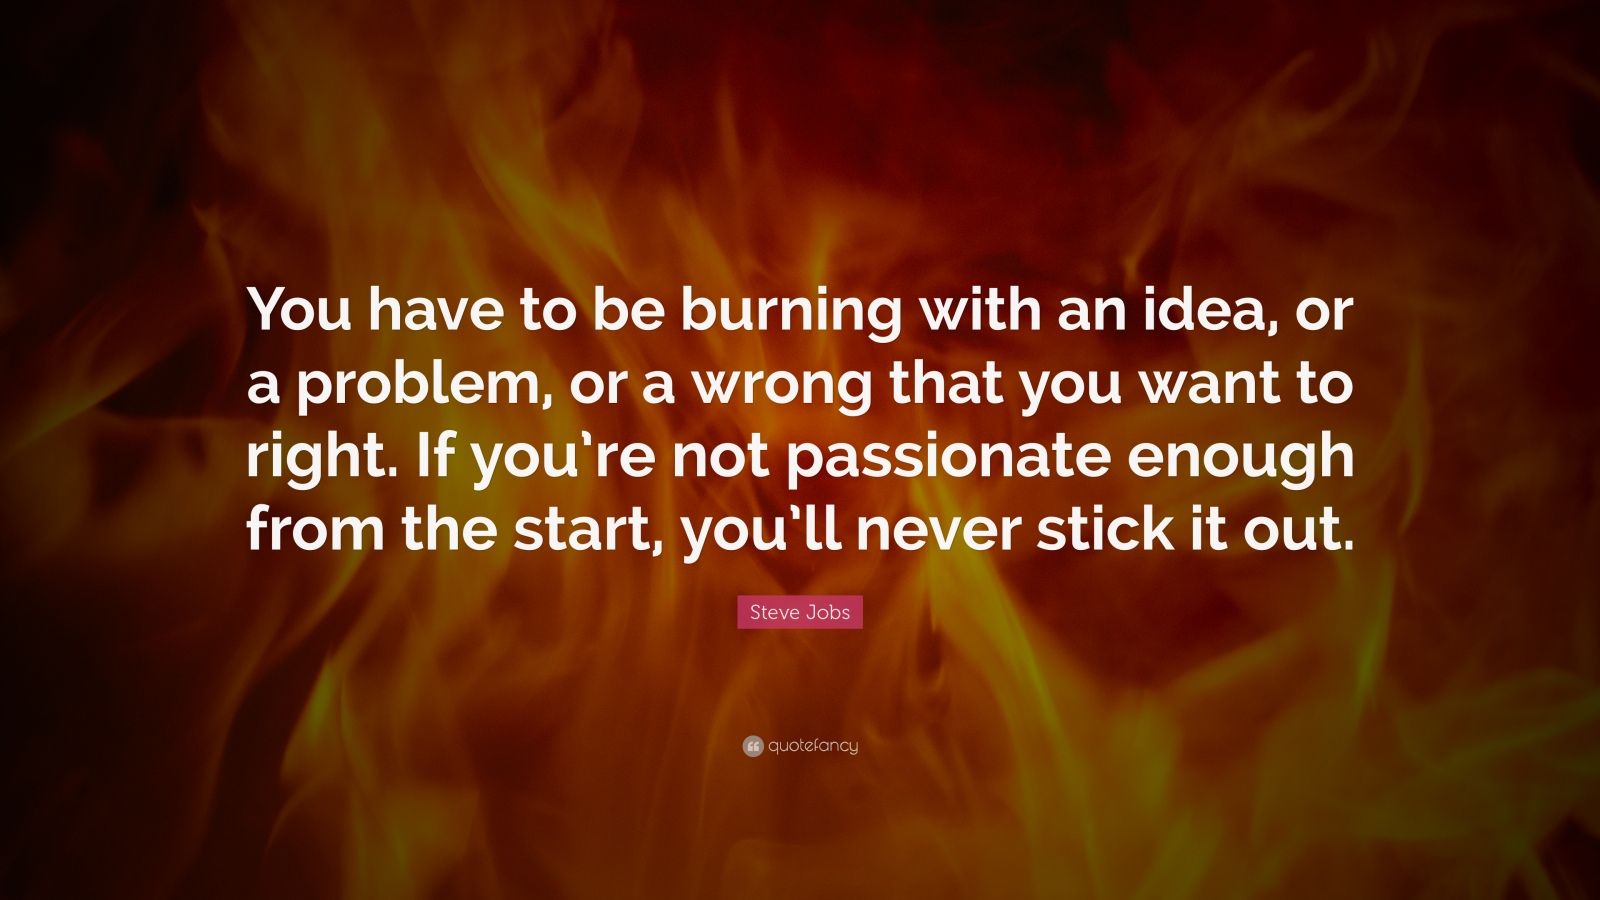 Steve Jobs Quote “You have to be burning with an idea or a